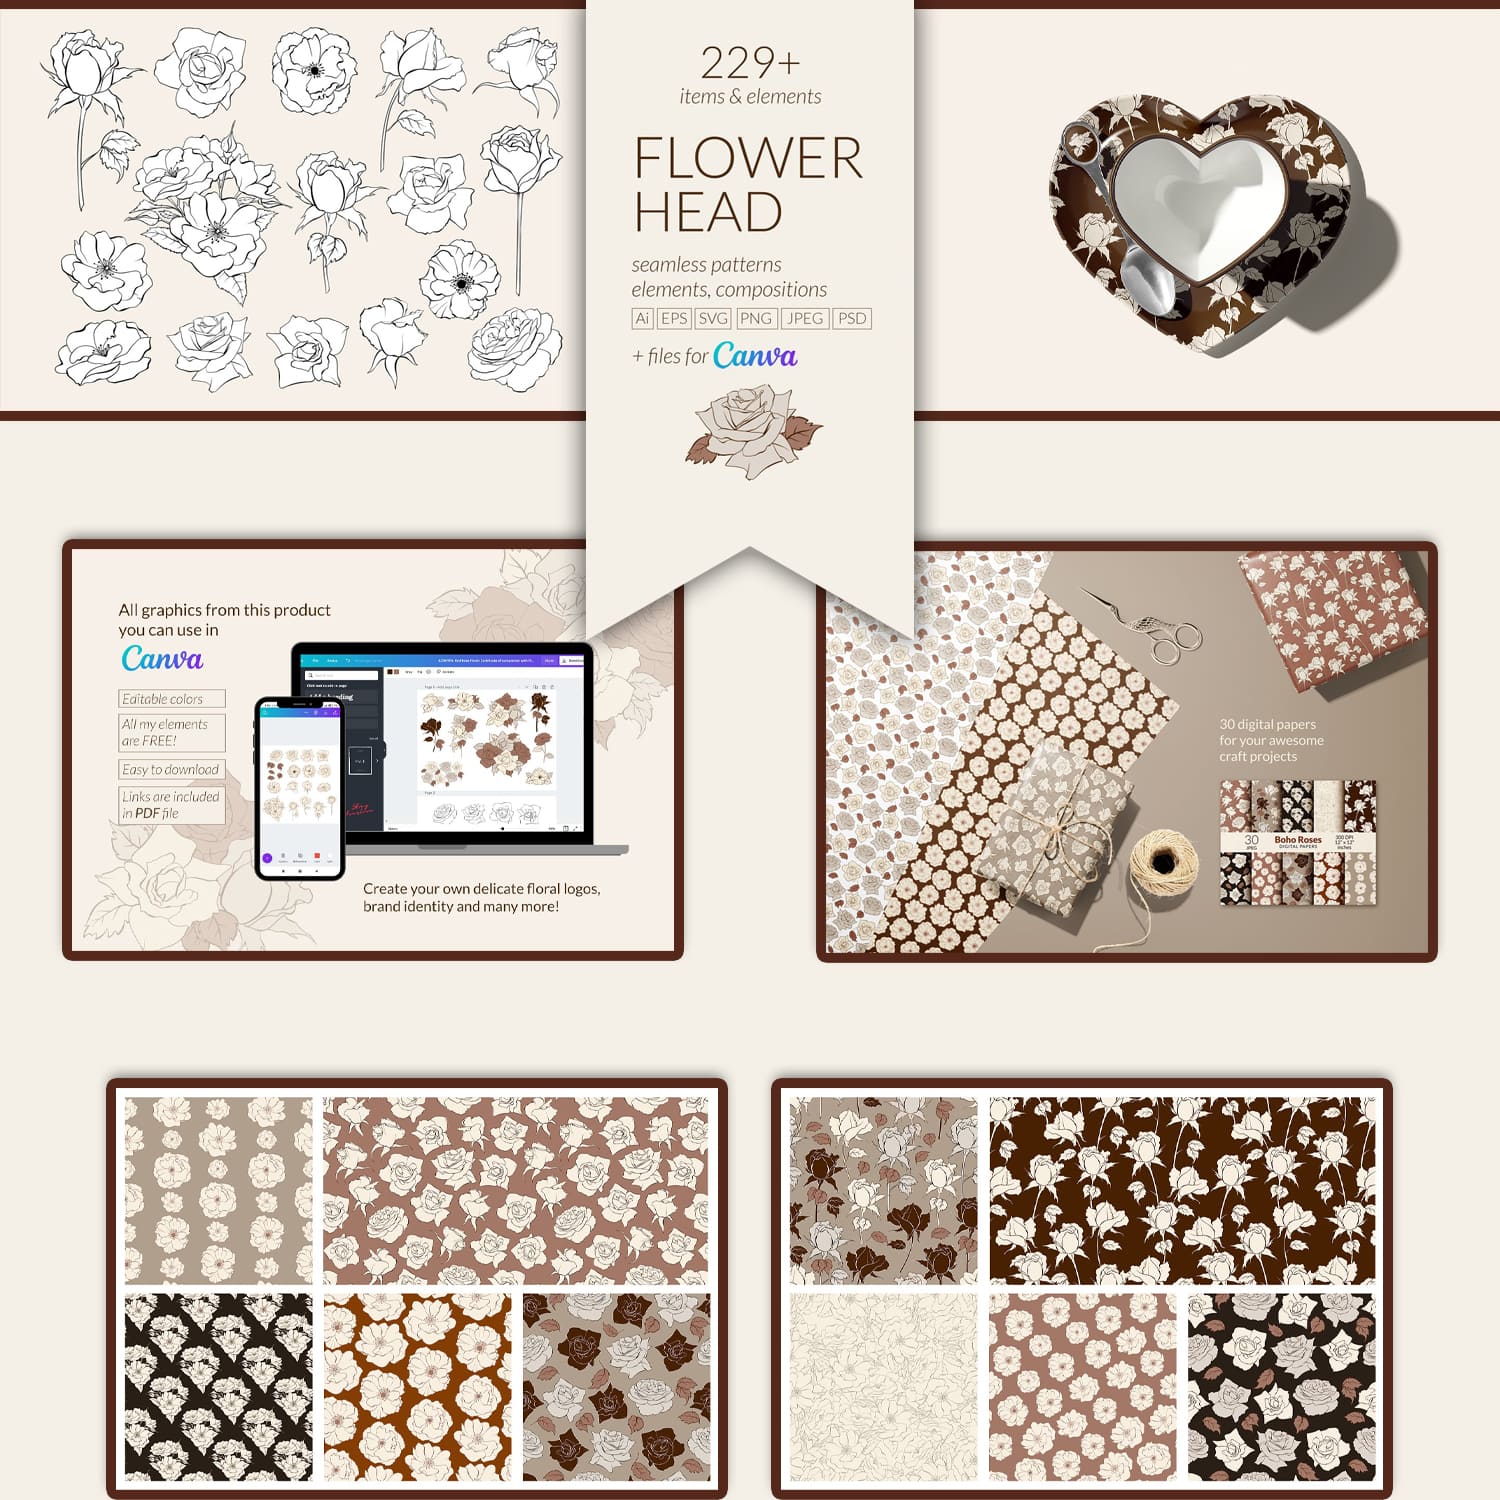 Flowerhead Collection - delicate line art drawings turned into vector seamless patterns.